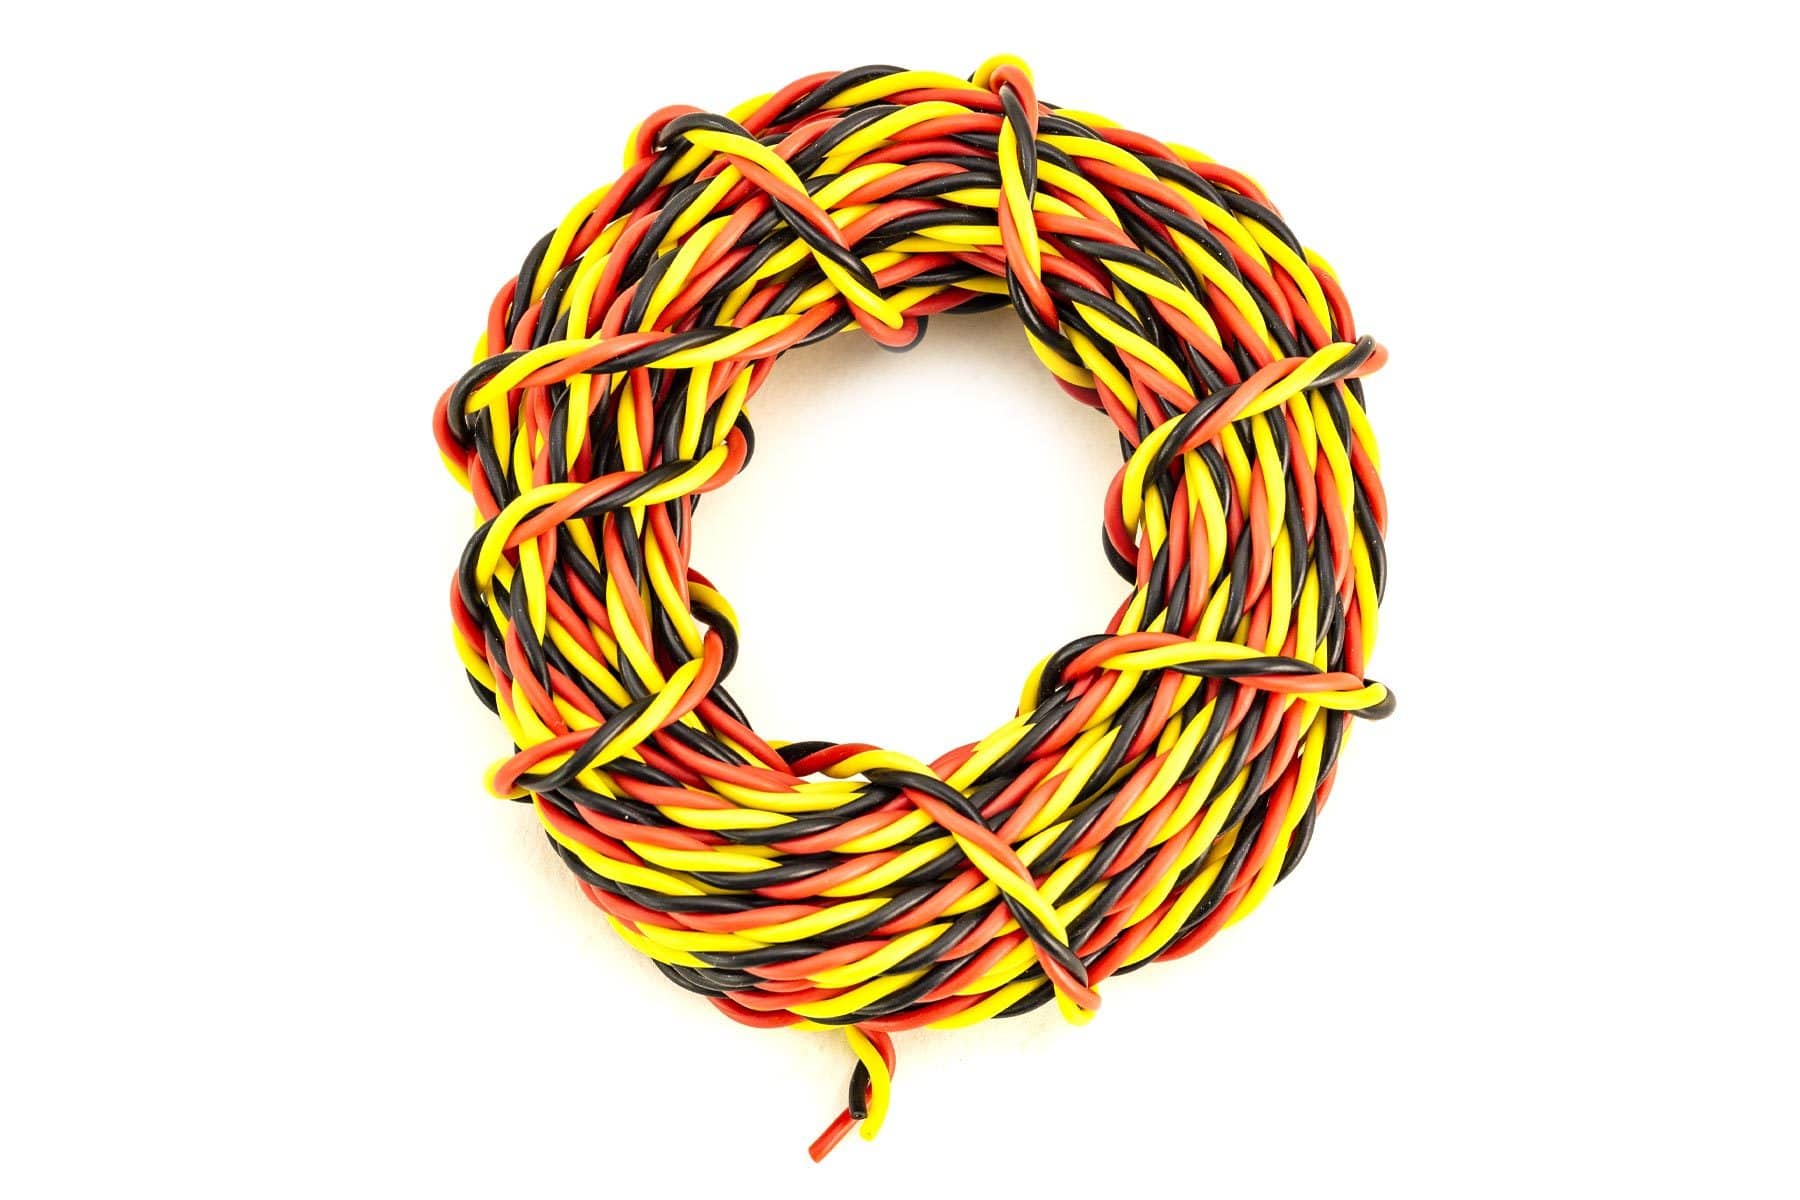 BenchCraft 26 Gauge Twisted Servo Wire - Yellow/Red/Black (5 Meters) BCT5003-004